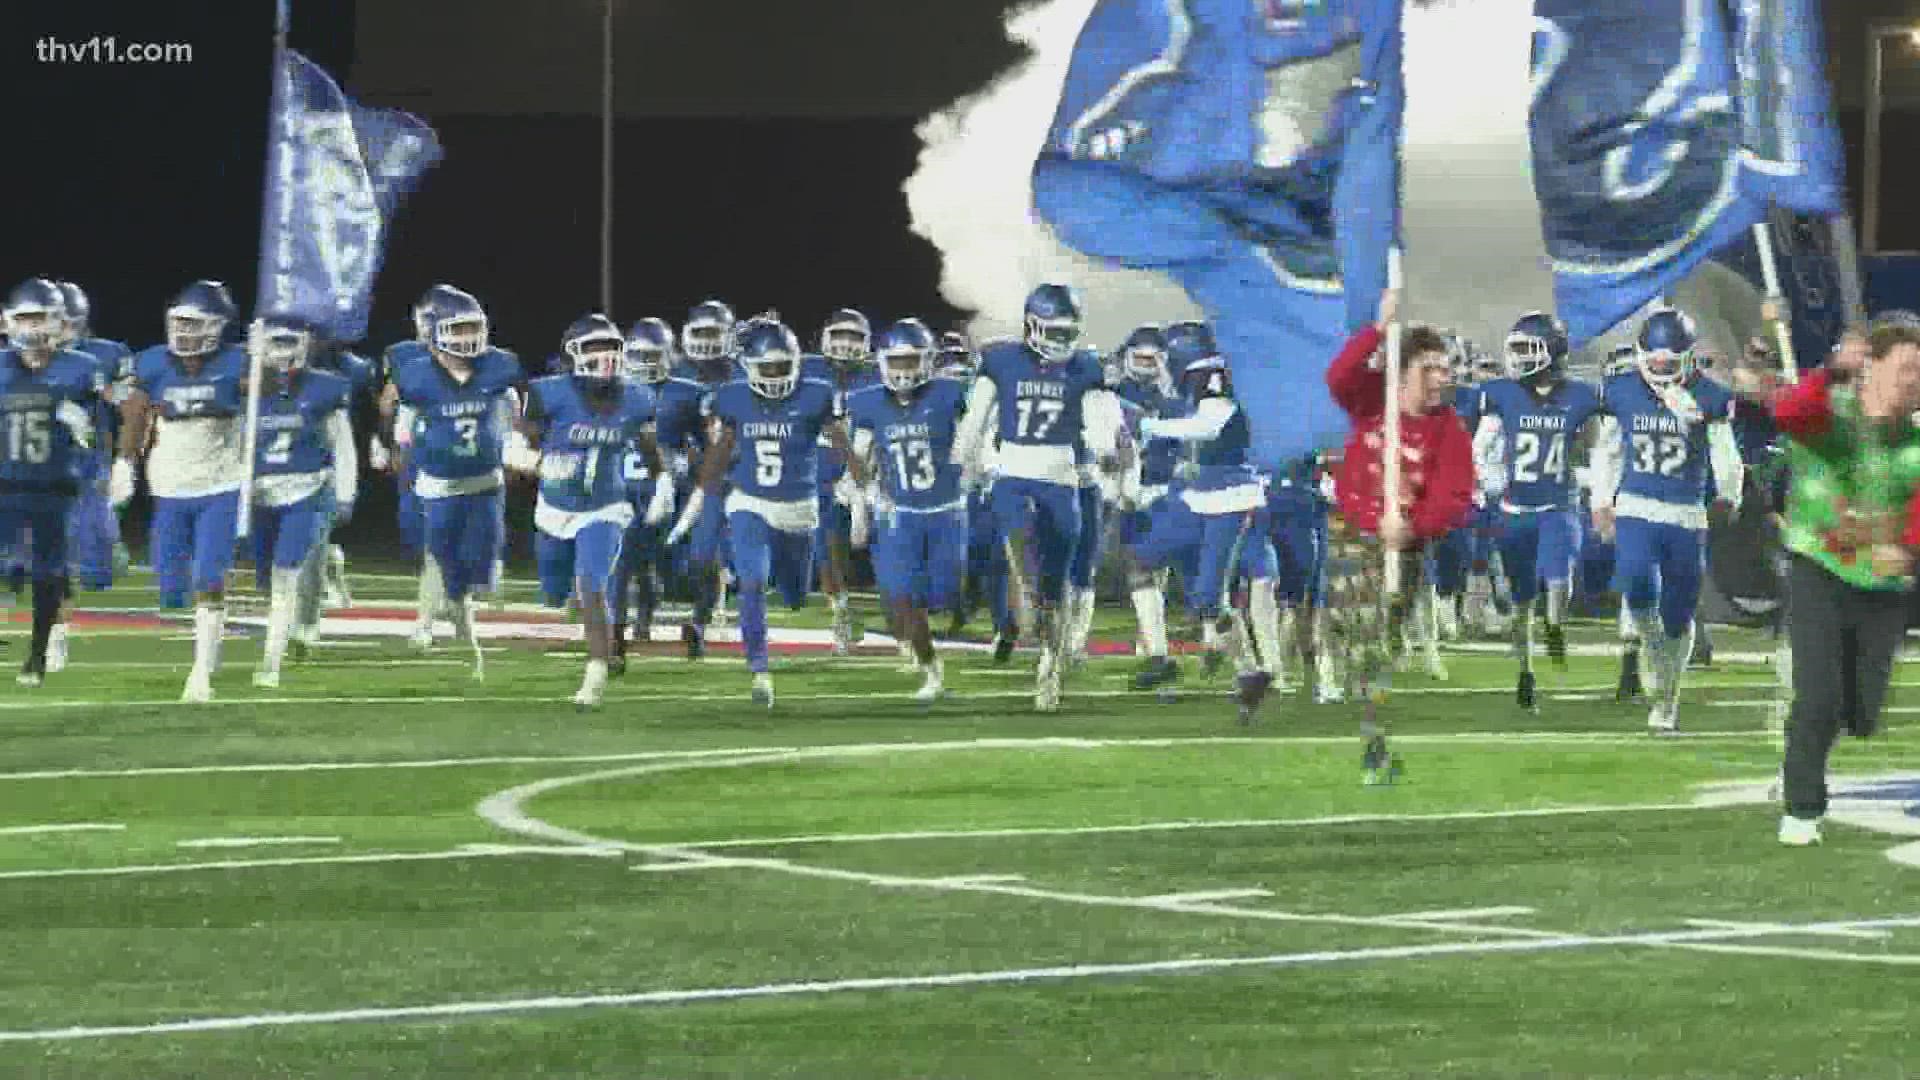 The Conway Wampus Cats made it look real easy on Friday when they defeated the Rogers Mountaineers 49-0.